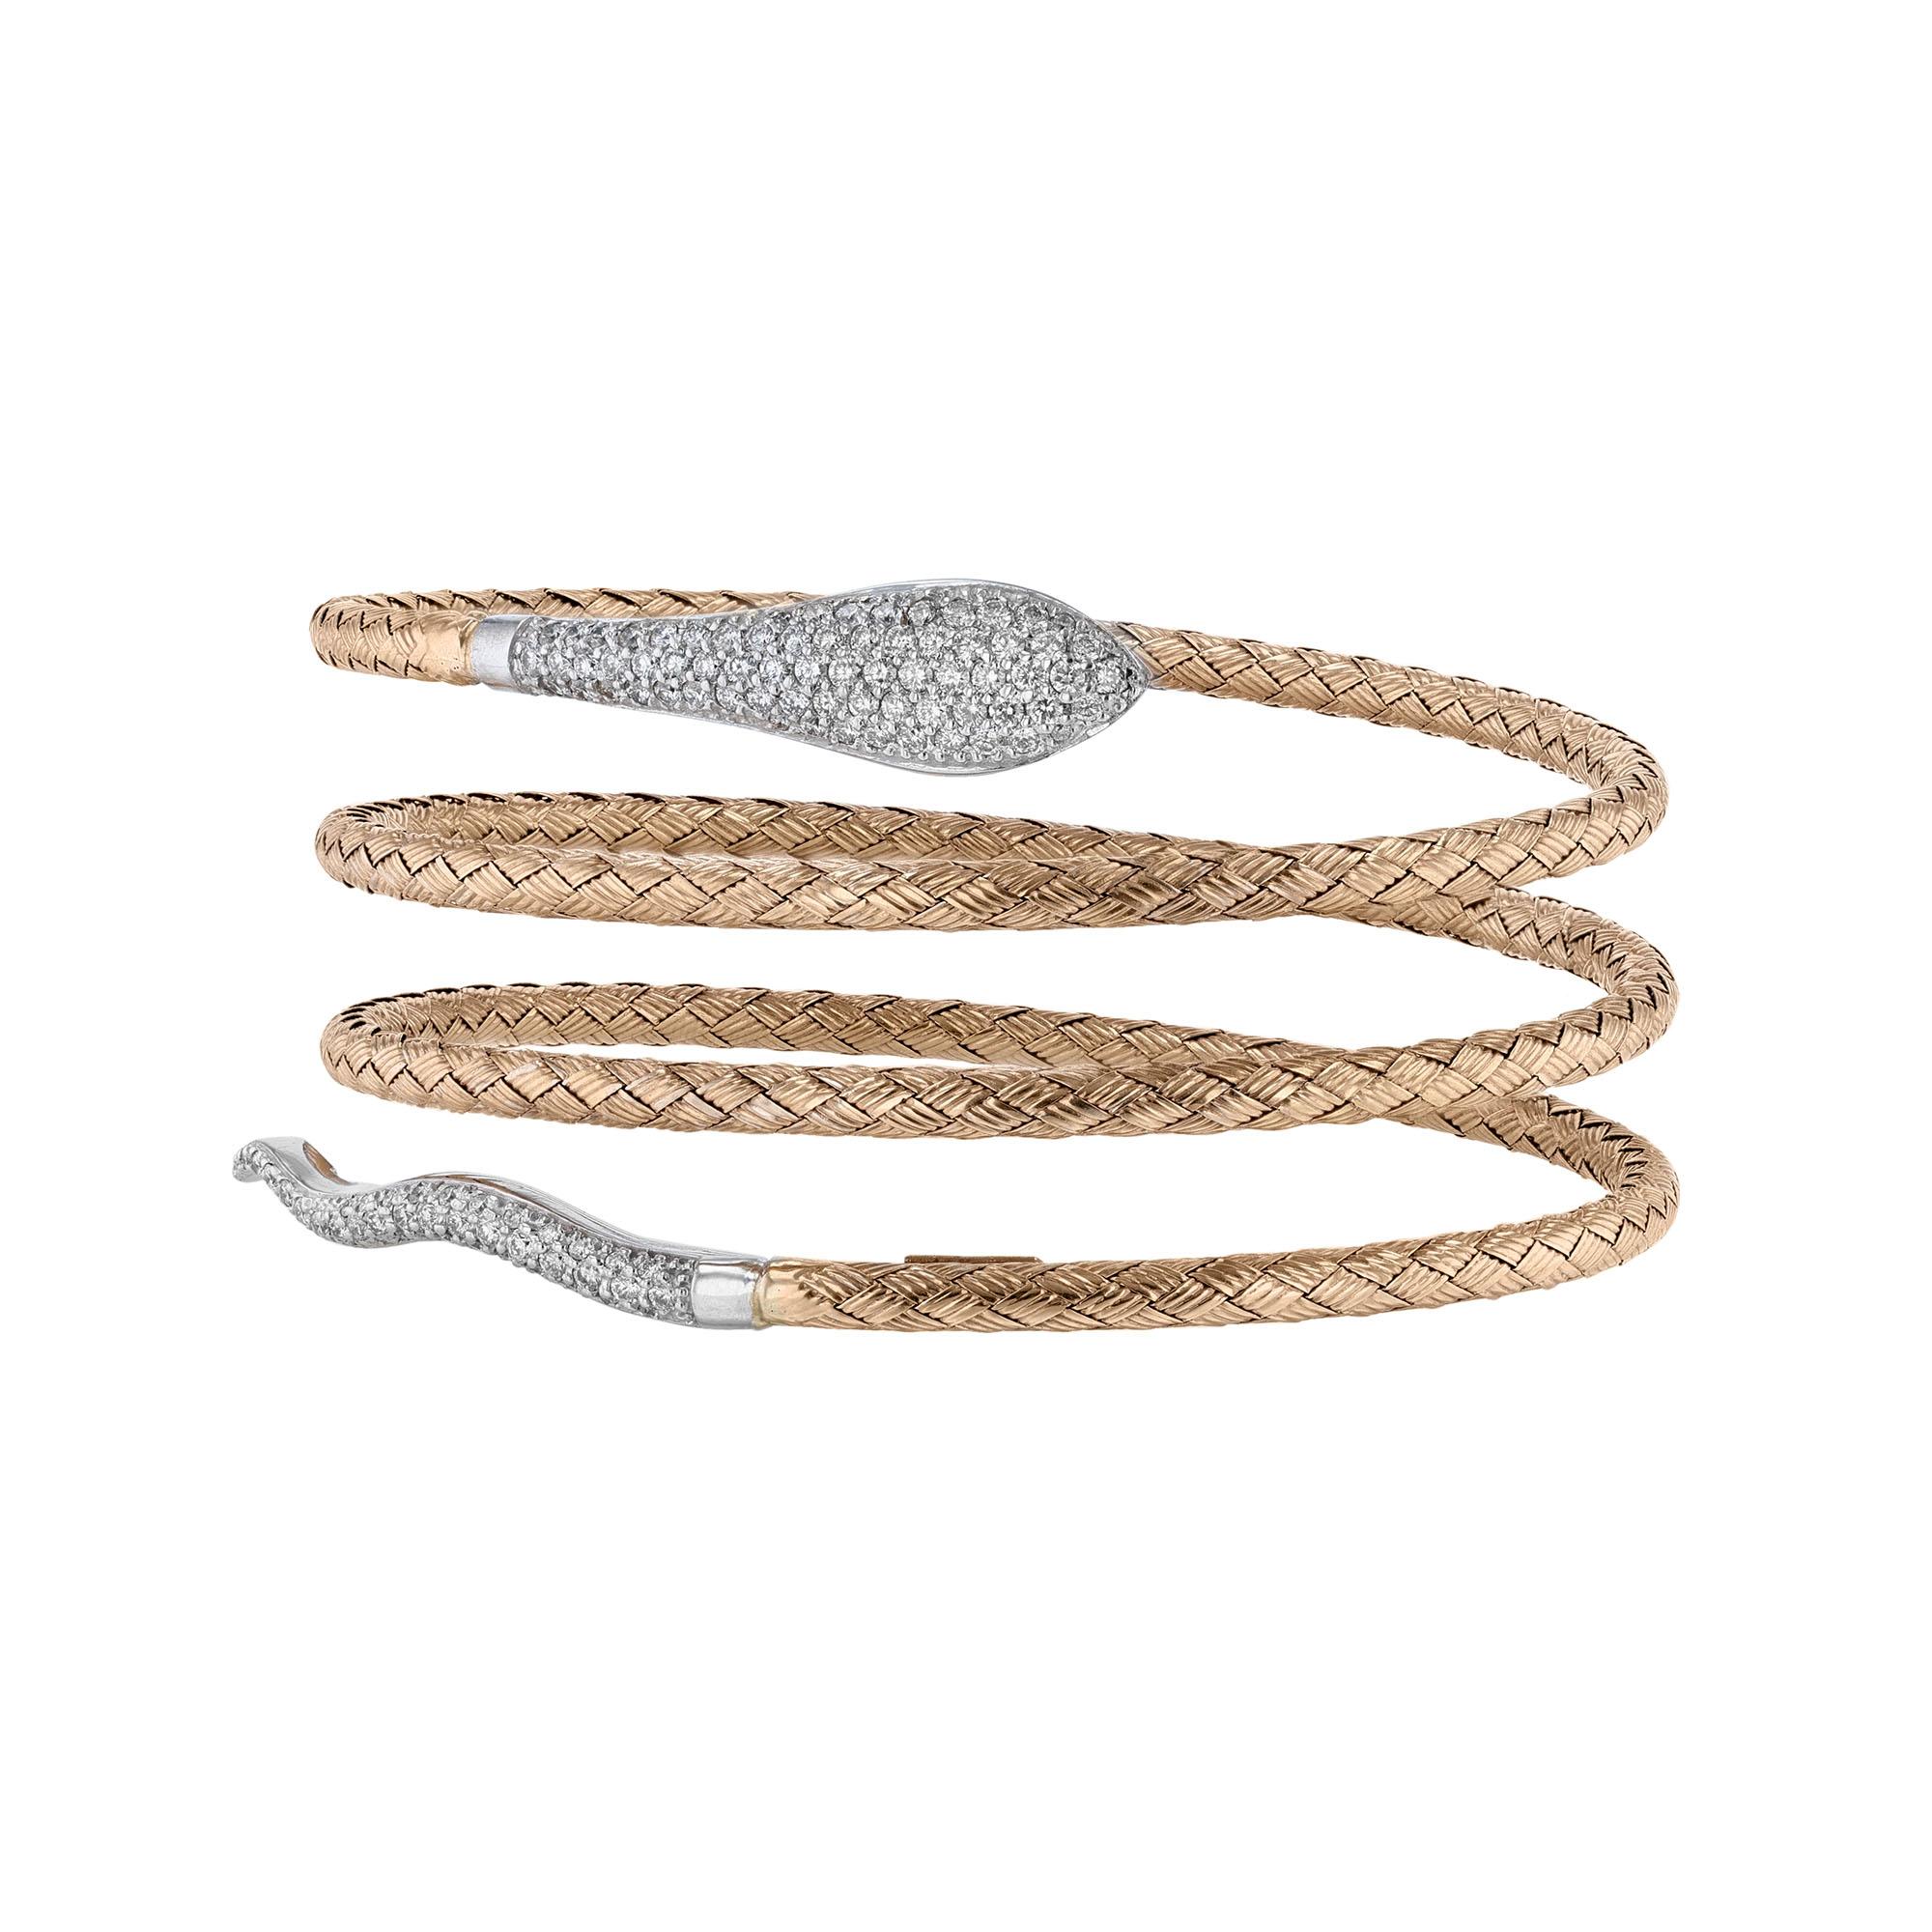 This bangle is made in 18K white and rose gold and features 110 round cut, pave' set diamonds weighing 1.00 carat. This bangle has a color grade (H) and a clarity grade of SI2.